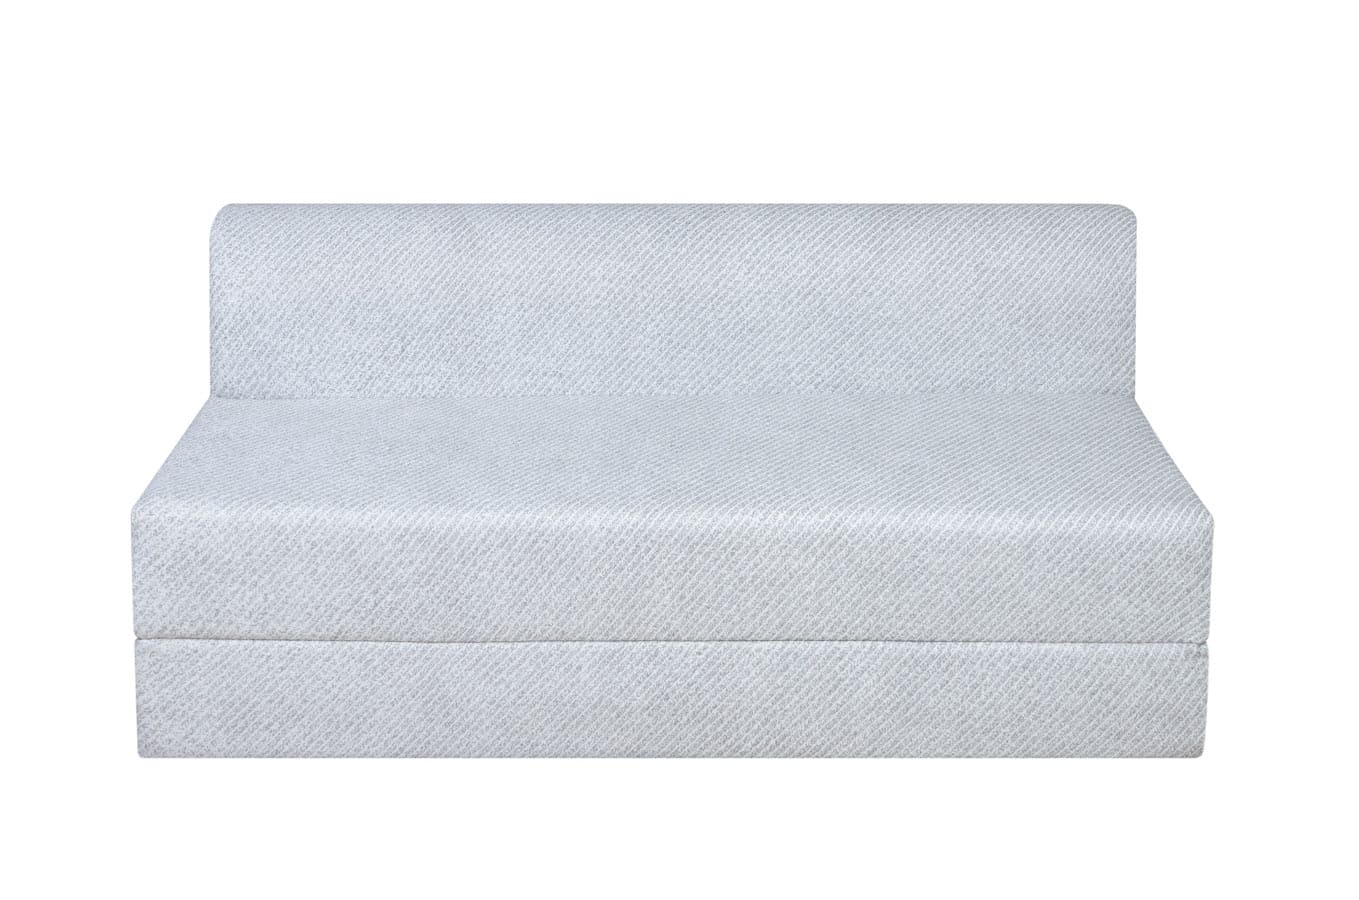 Bindal Sofa Cume Bed Double Size 4X6.5 Feet 48X78 Thickness 8 Inch